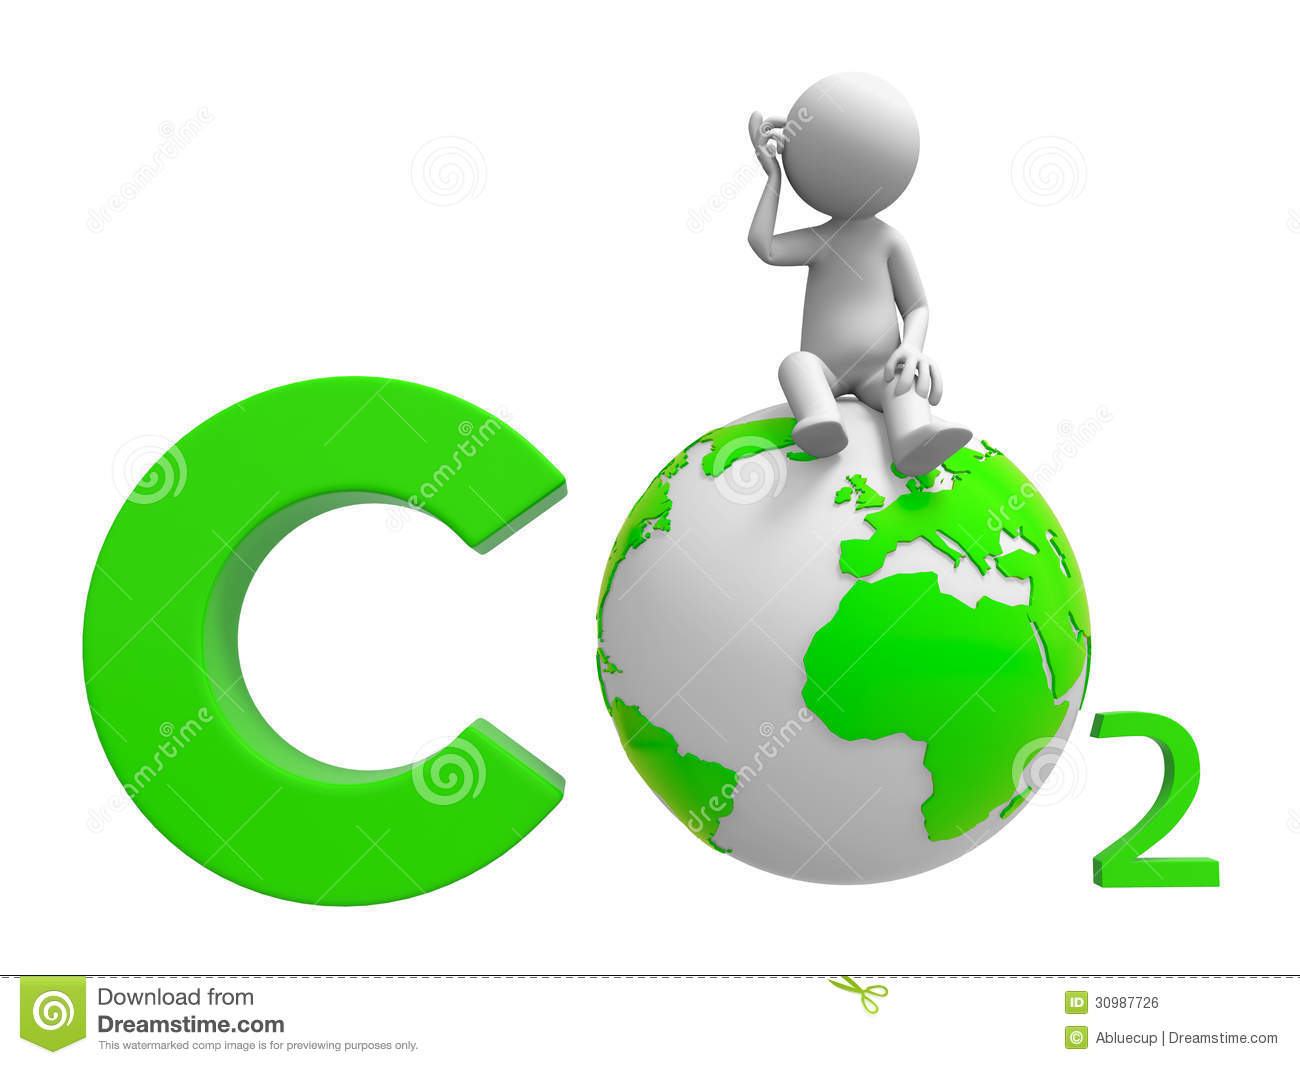 Co2 And Earth Royalty Free Stock Image   Image  30987726